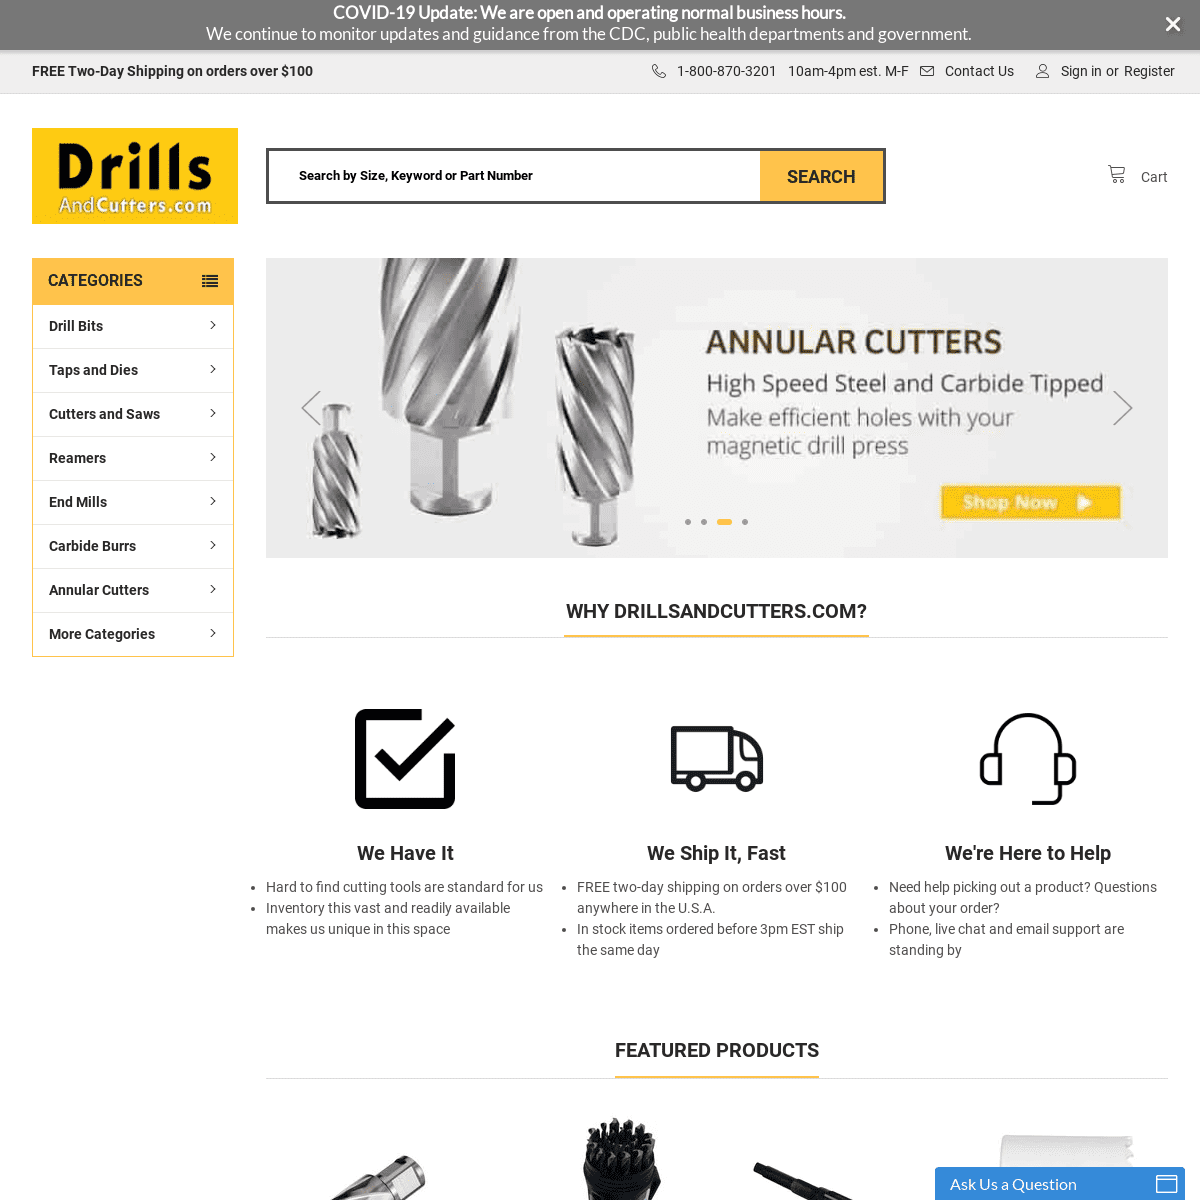 A complete backup of drillsandcutters.com